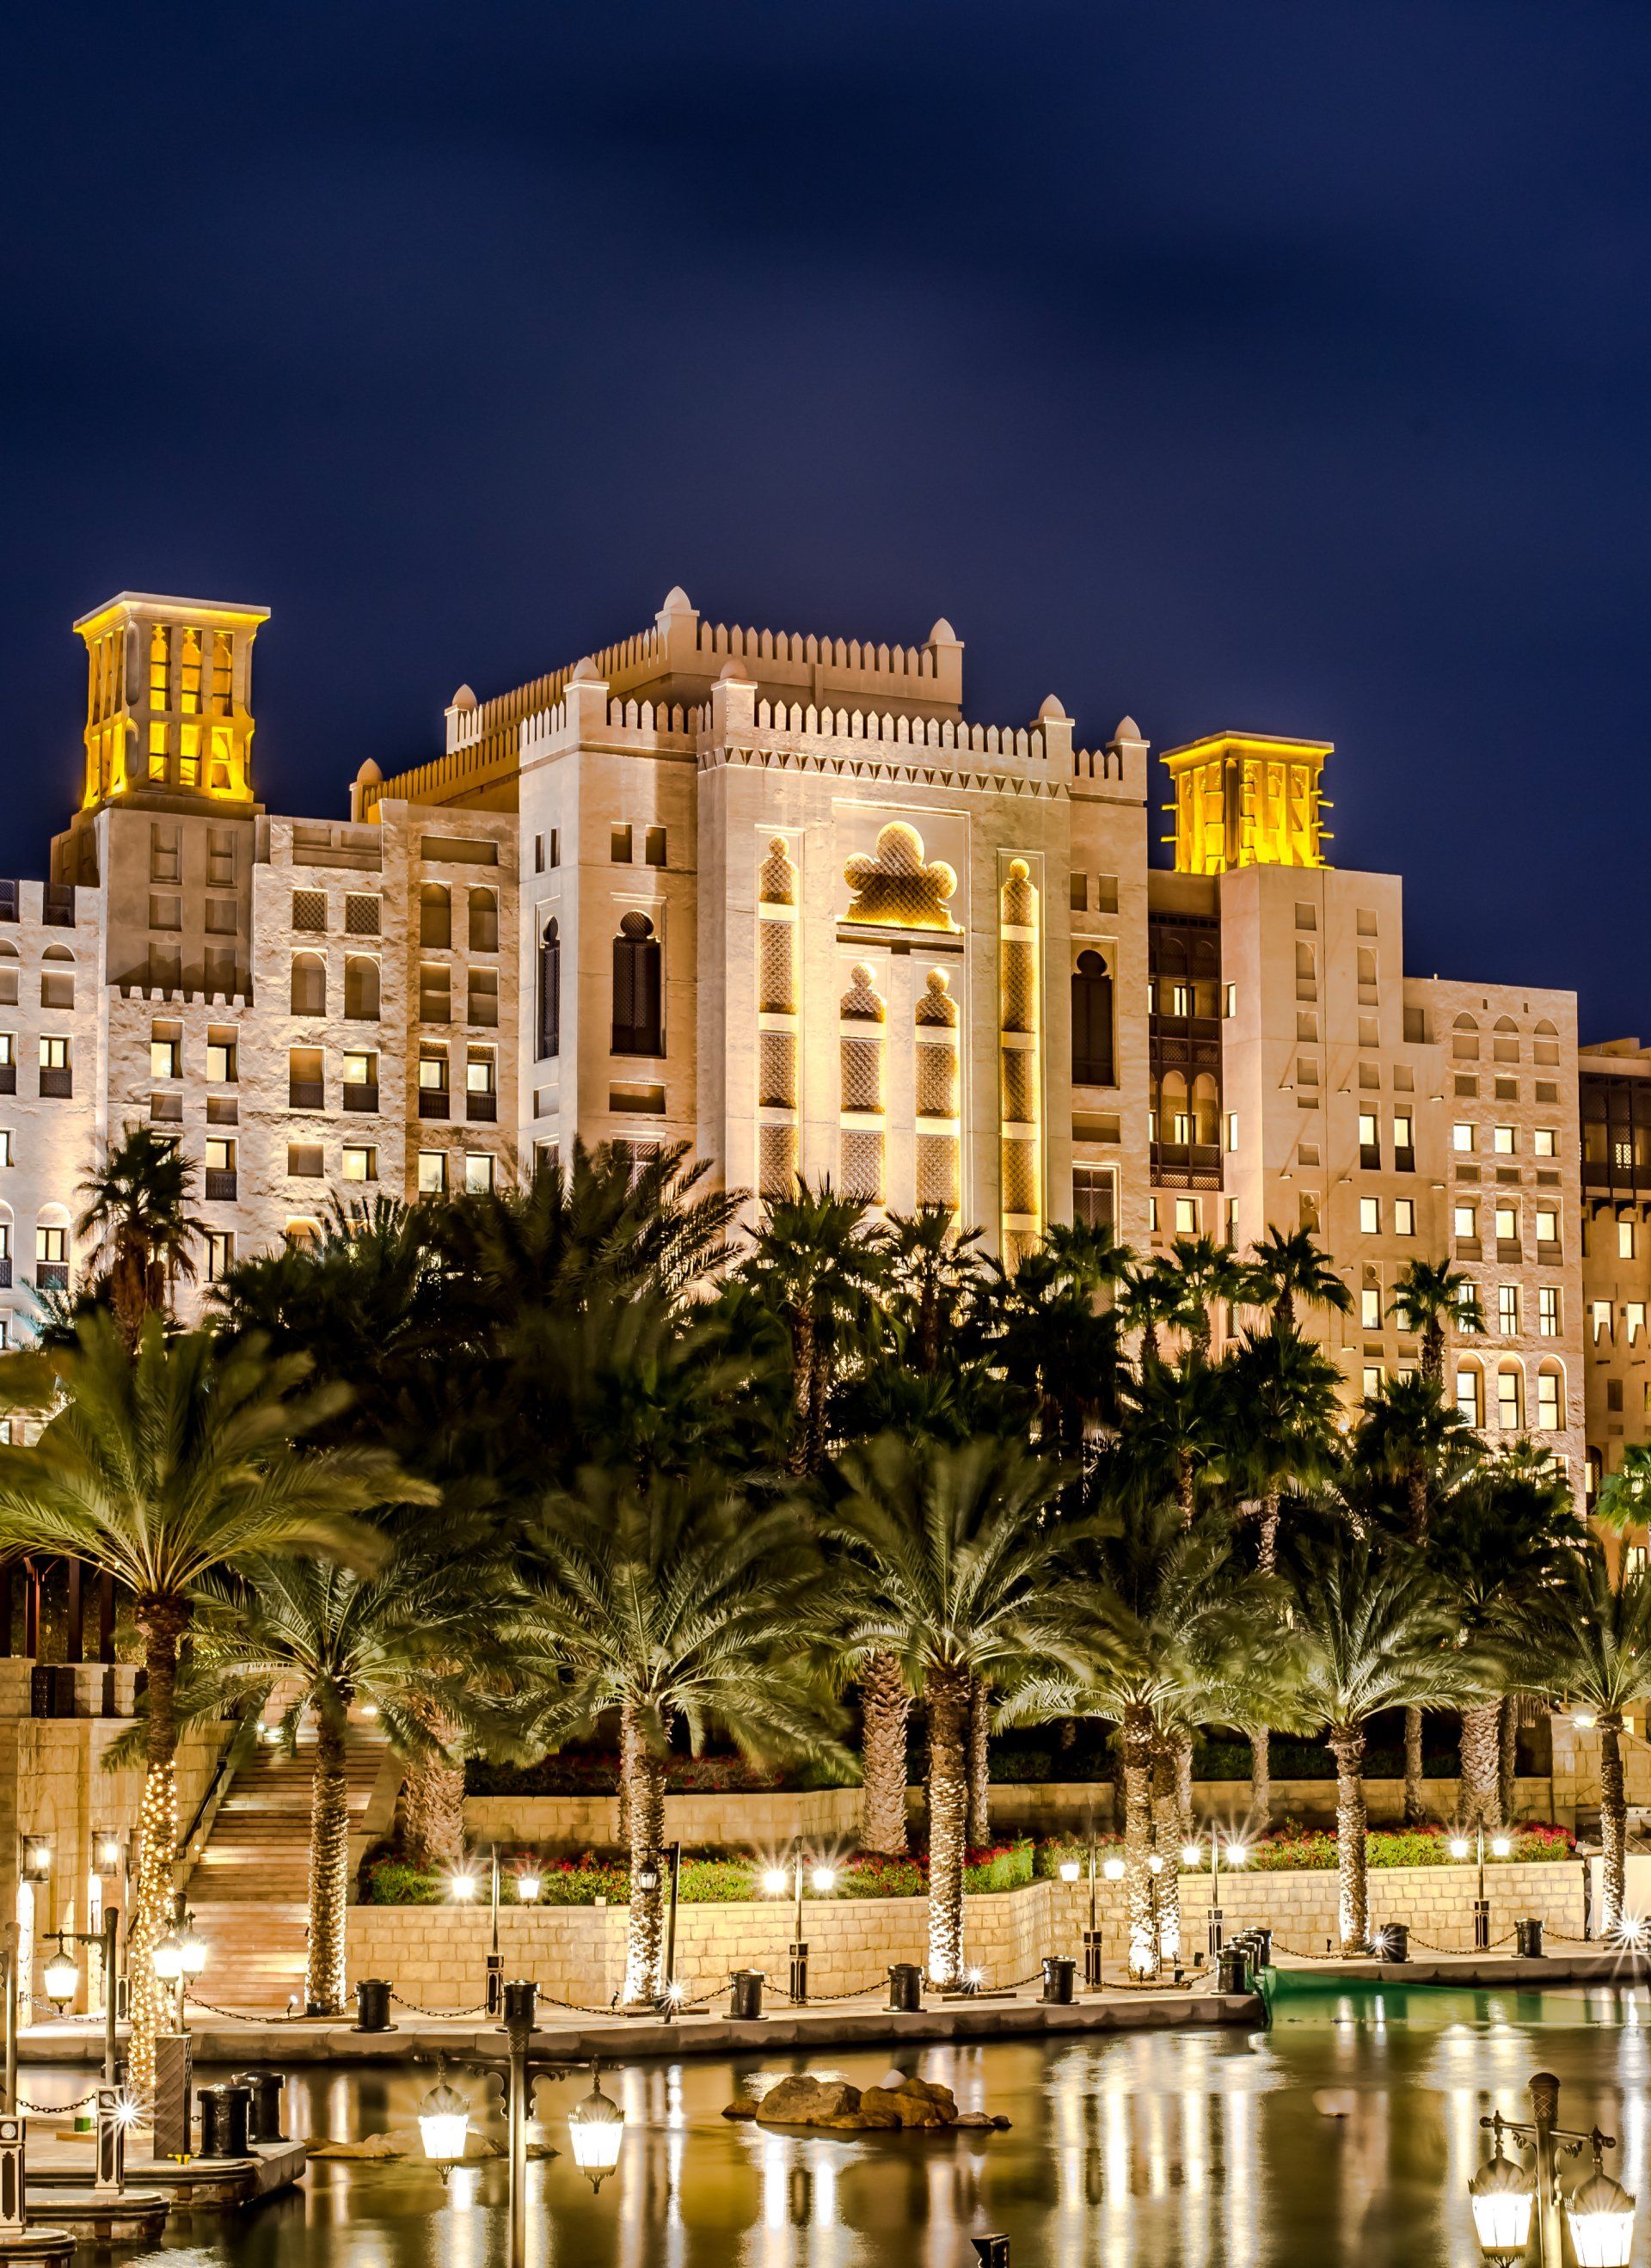 A large hotel is lit up at night with palm trees in front of it.